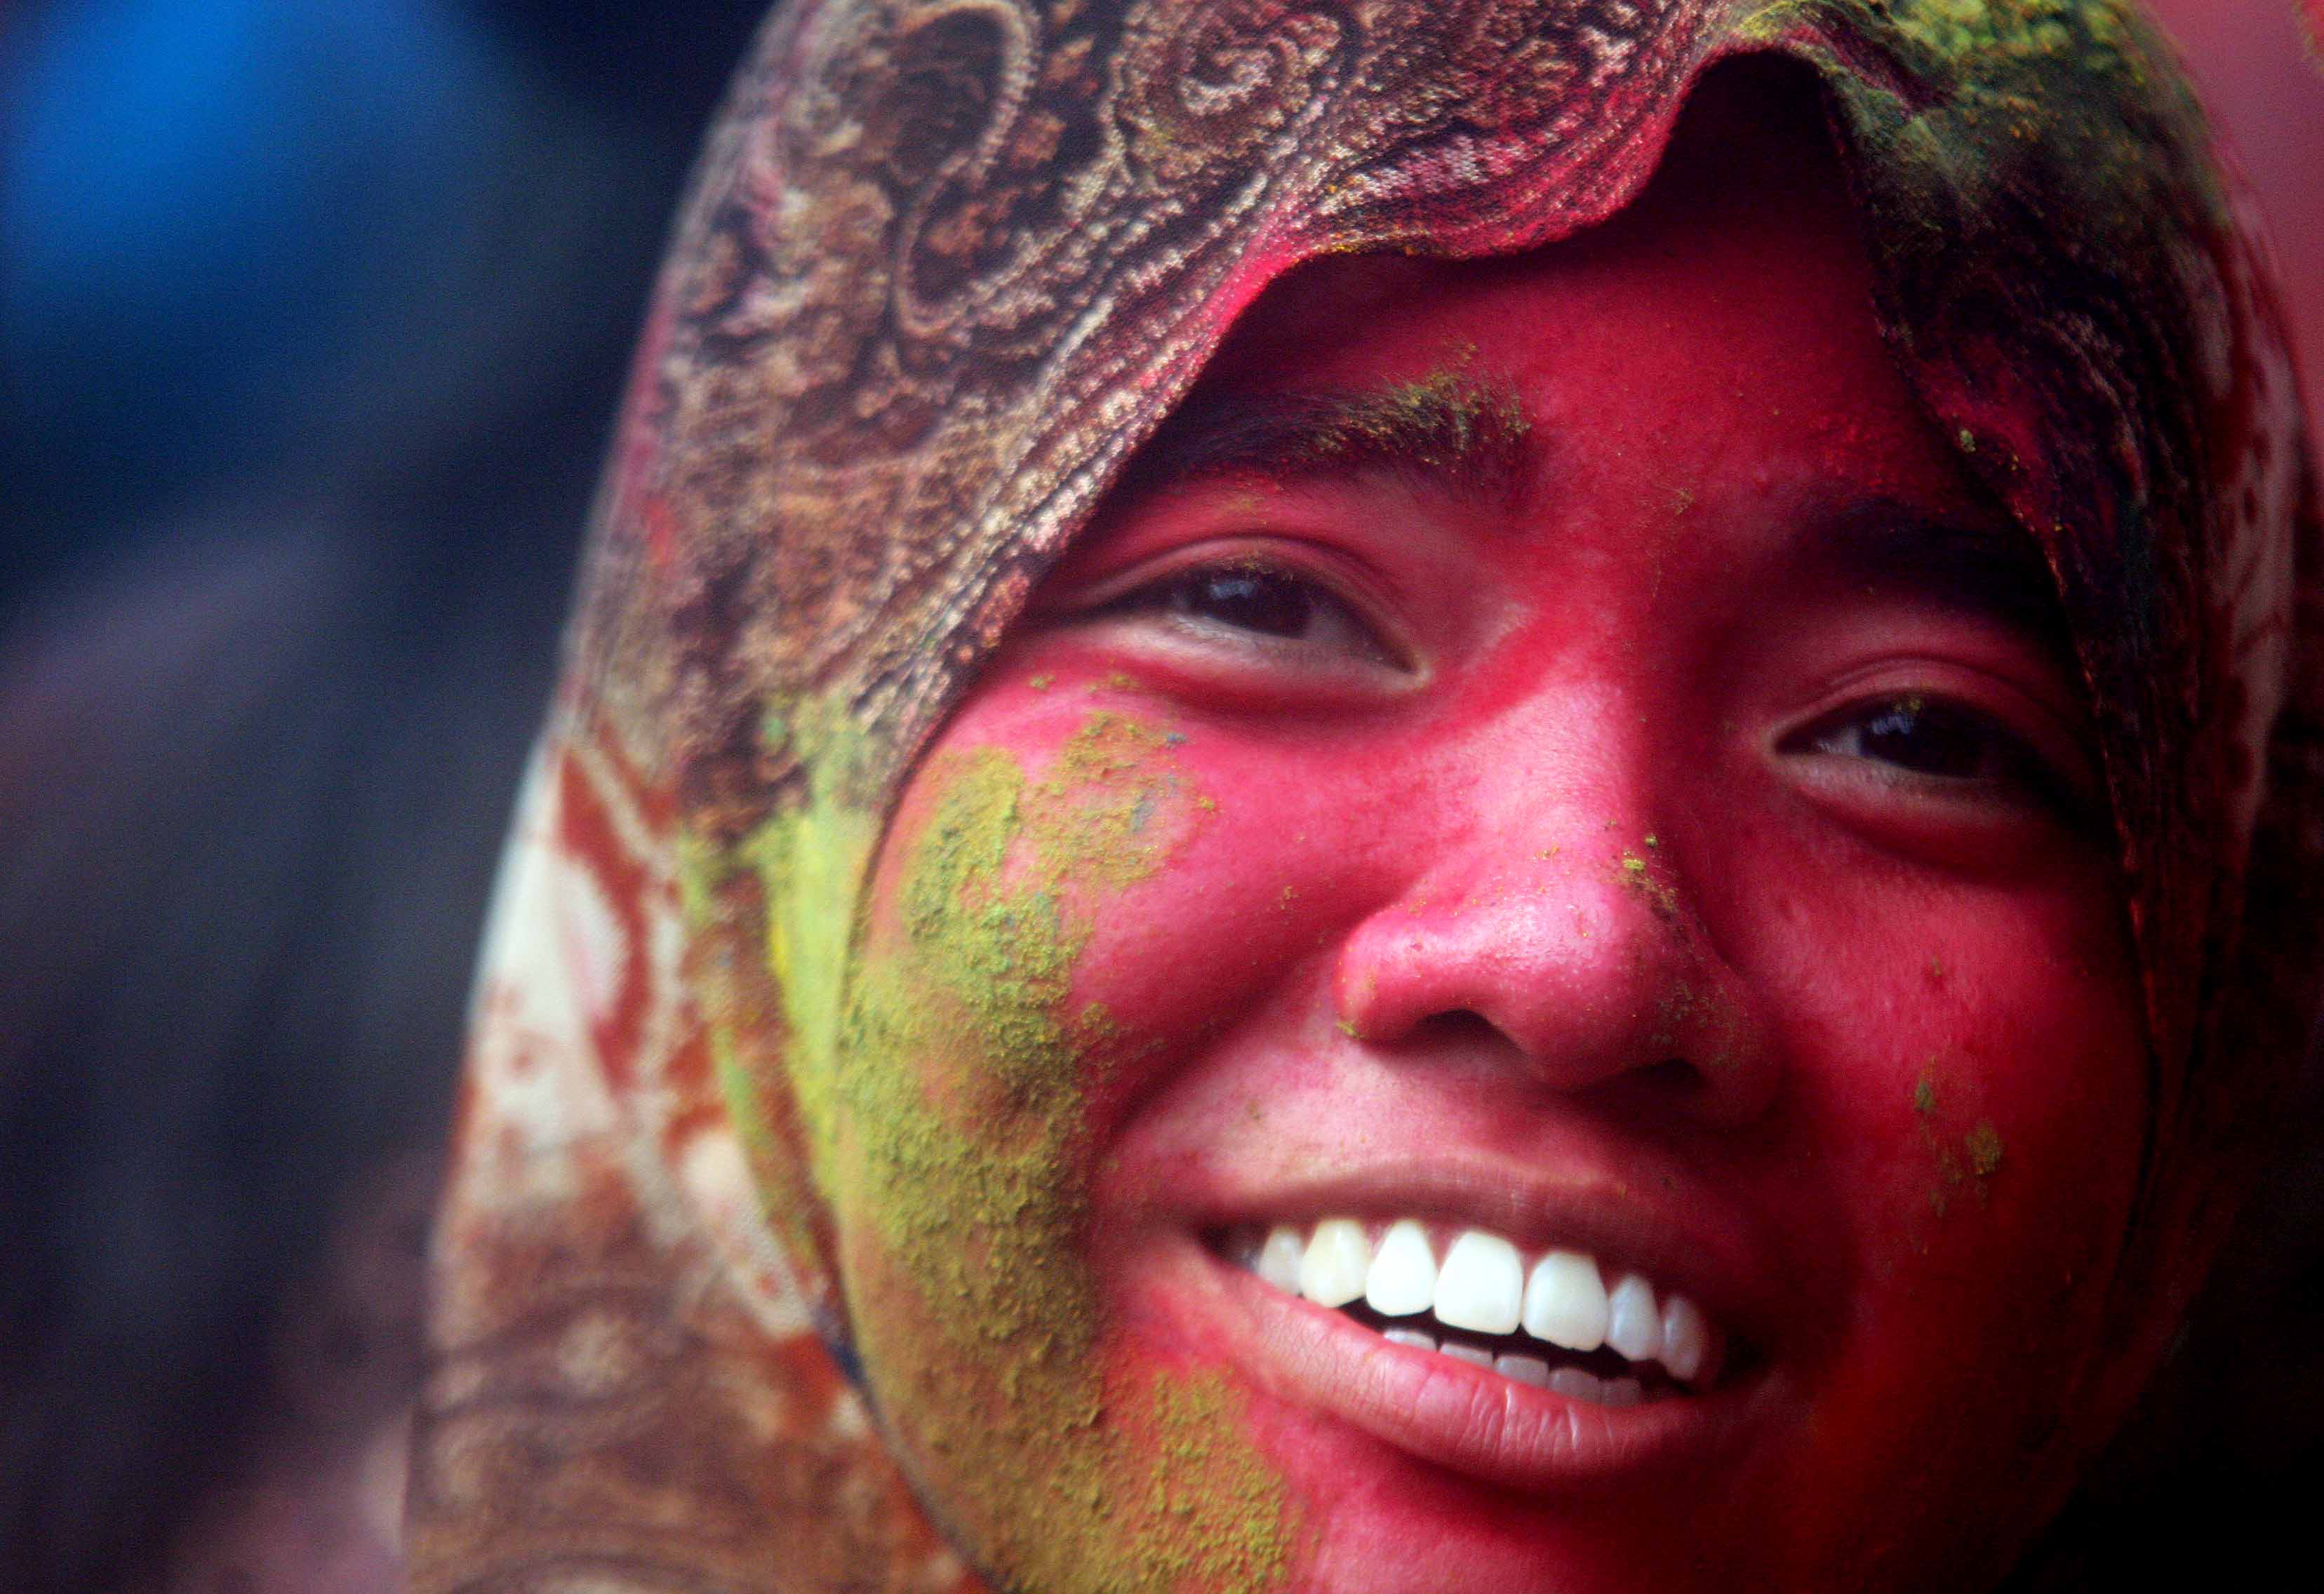 A malay girl, face with coloured powder during Holi festival celebrations at Shree Lakshmi Narayan Temple in Kuala Lumpur on March 31,2013 - a-malay-girl-face-with-coloured-powder-during-holi-festival-celebrations-at-a-shree-lakshmi-narayan-temple-in-kuala-lumpur-on-march-312013